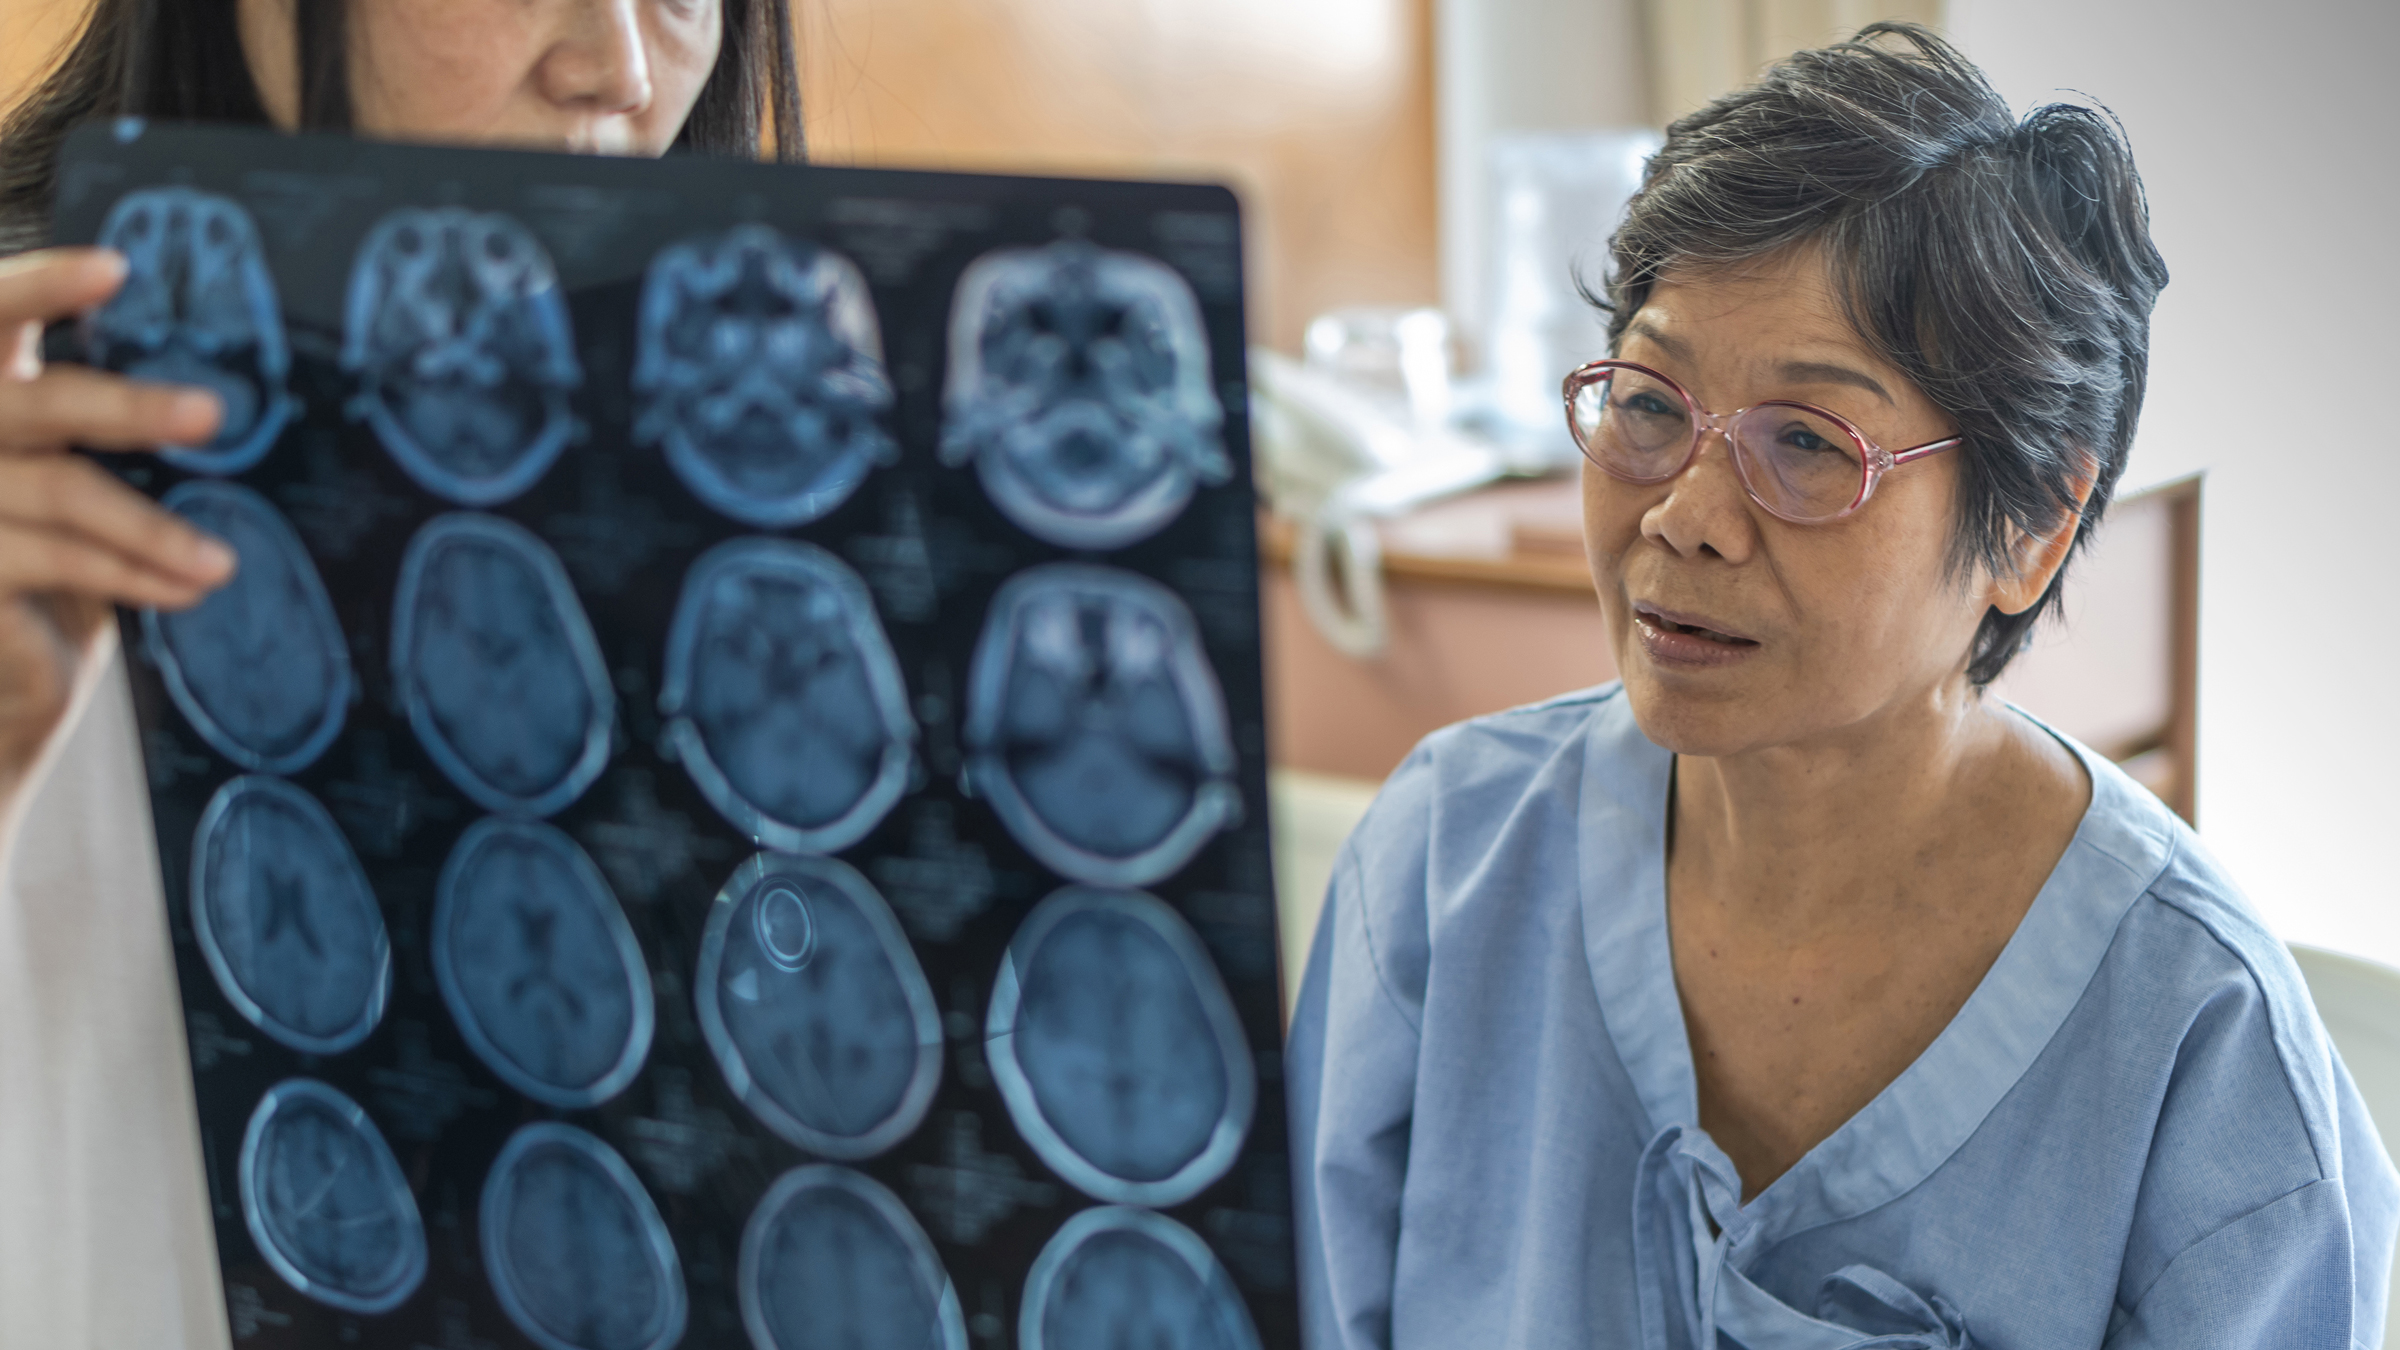 A doctor shows a brain scan image to a woman in a blue hospital gown